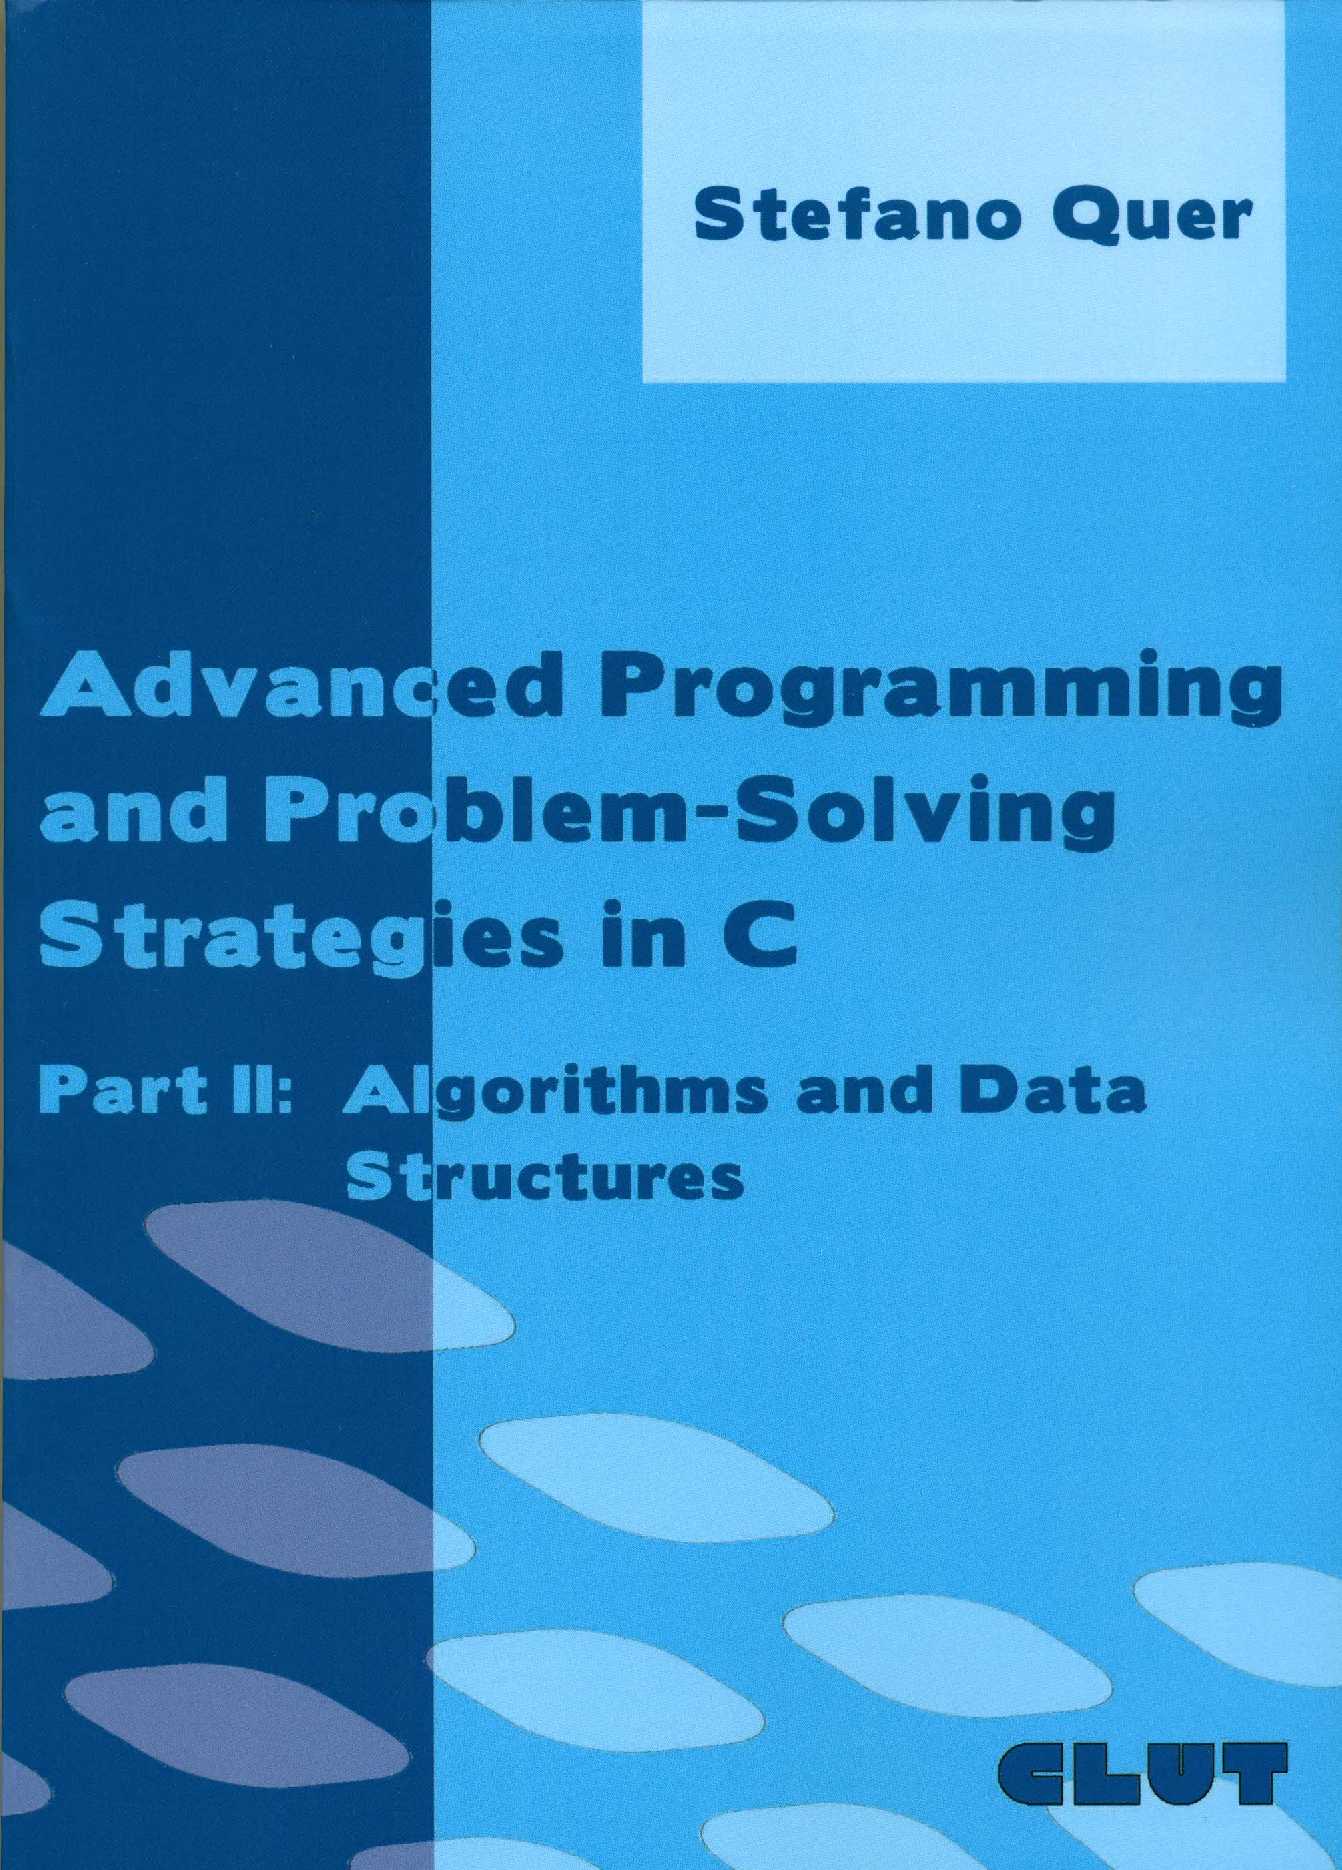 ADVANCED PROGRAMMING AND PROBLEM-SOLVING STRATEGIES IN C. PART II: ALGORITHMS AND DATA STRUCTURES II ed